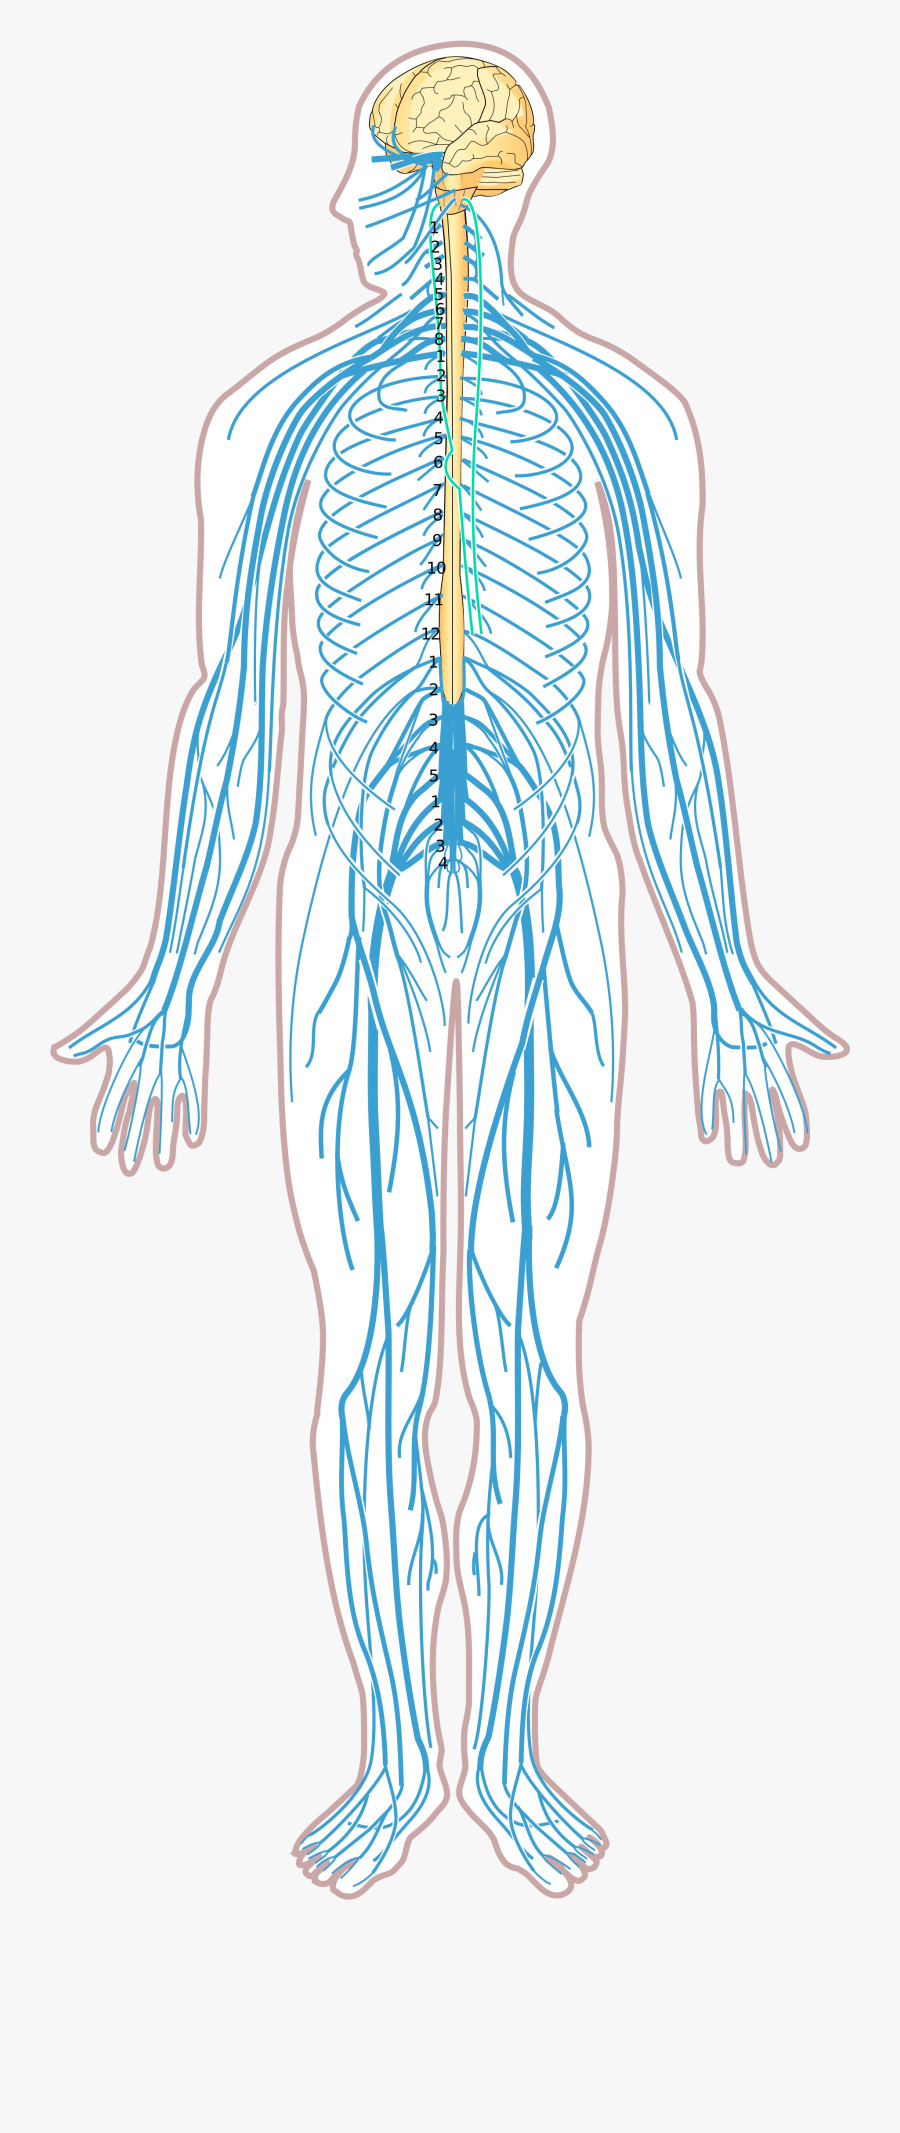 Nervous System Diagram Unlabeled , Free Transparent Clipart - ClipartKey